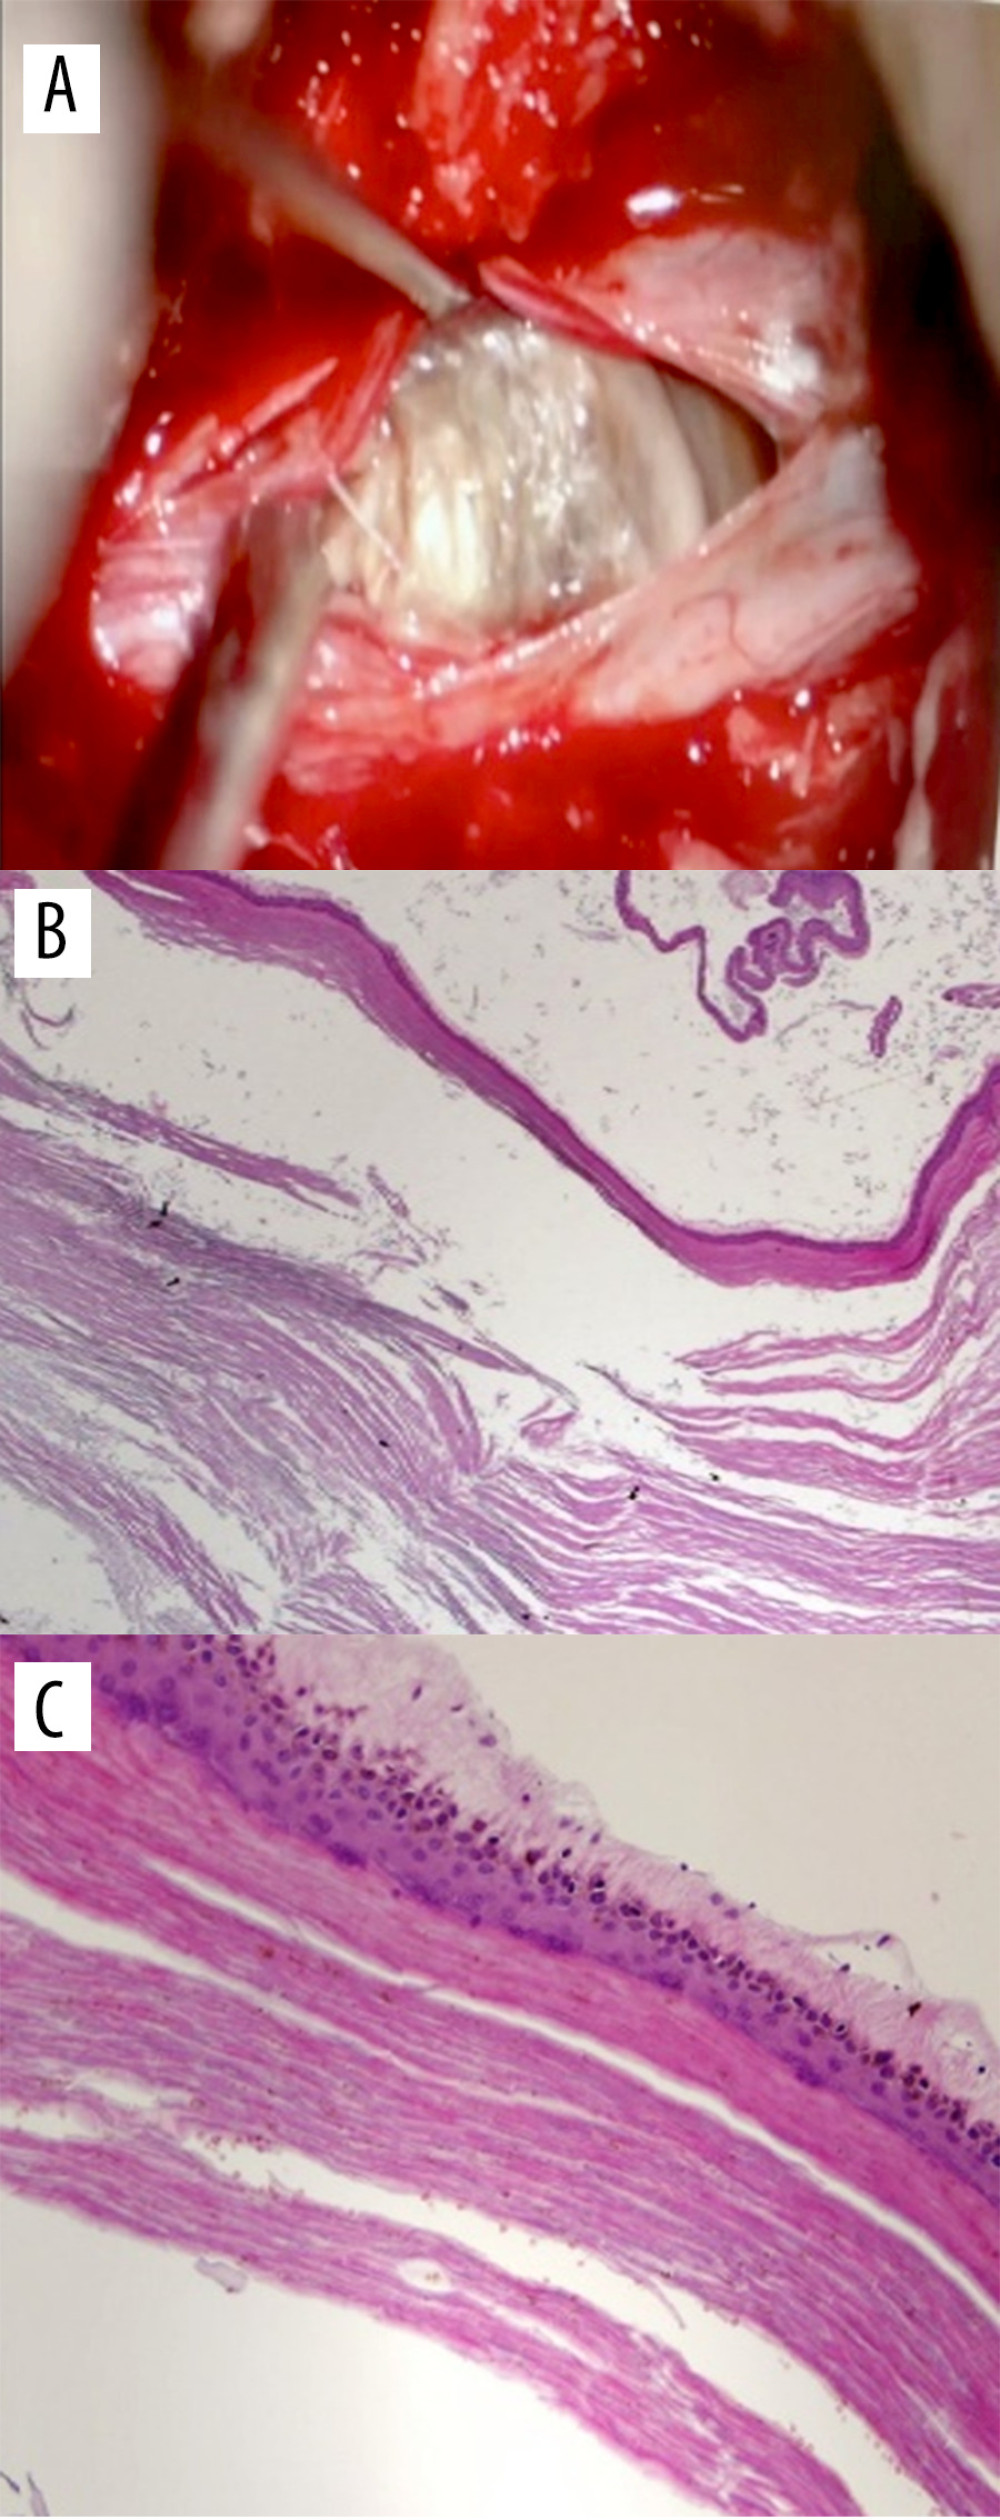 (A) Gross picture of the lesion during surgery. The pathology report described the lesion grossly as a white tan friable soft tissue measuring 5×4×1 cm. (B) Low-power view shows cyst containing lamellated keratin material (original magnification ×20, H/E stain). (C) High-power view reveals cyst lining of stratified squamous epithelium with granular cell layer (original magnification ×200, H/E stain).